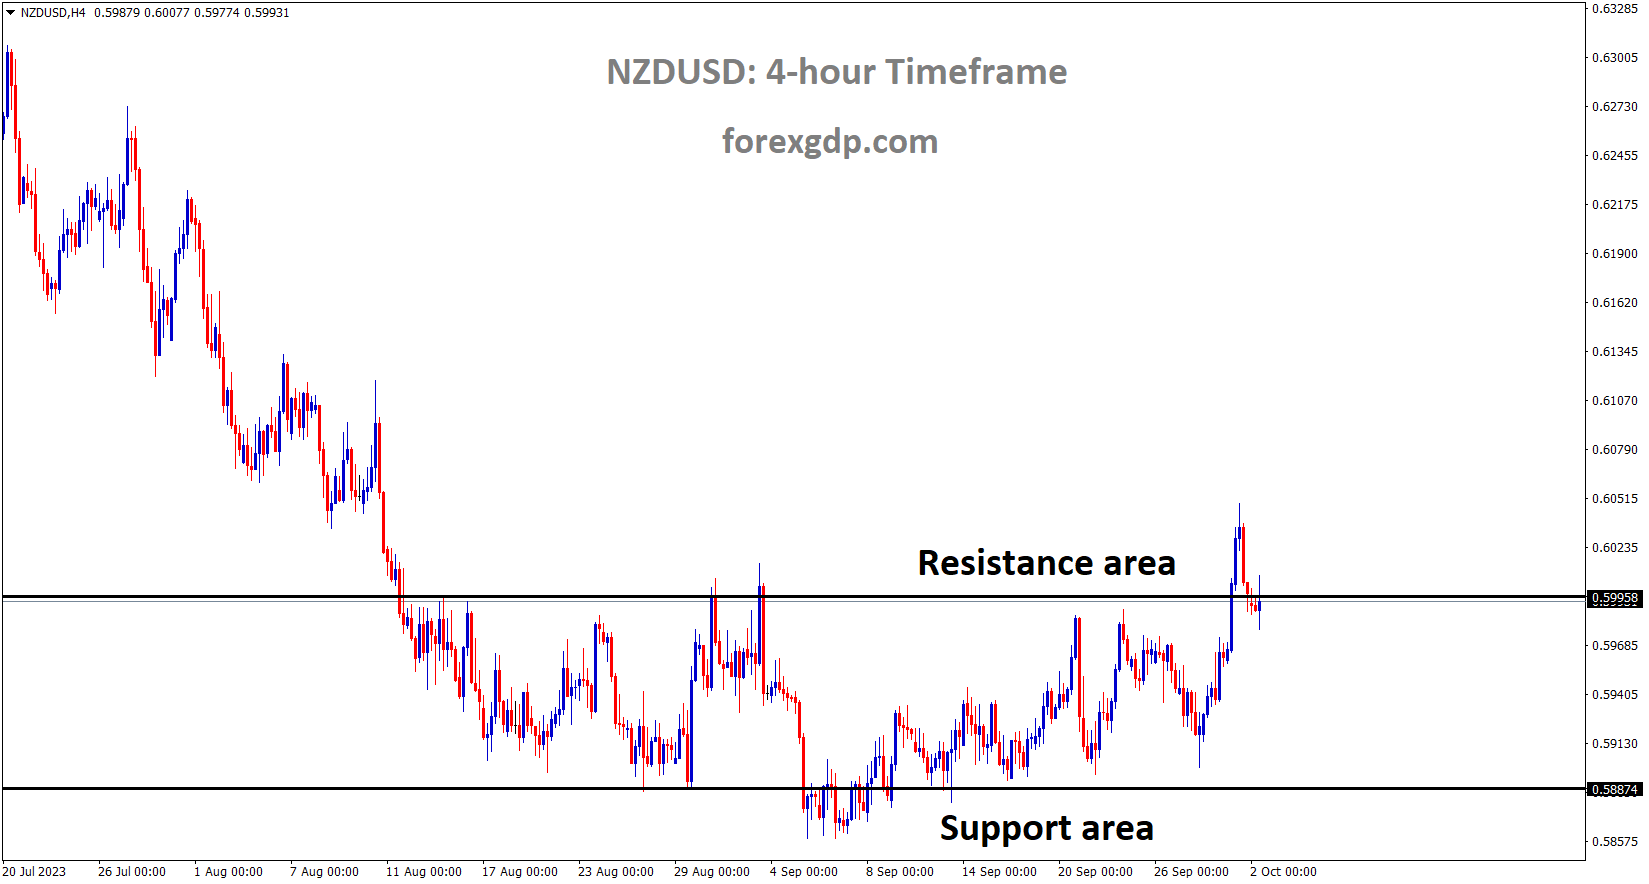 NZDUSD is moving in the Box pattern and the market has reached the resistance area of the pattern